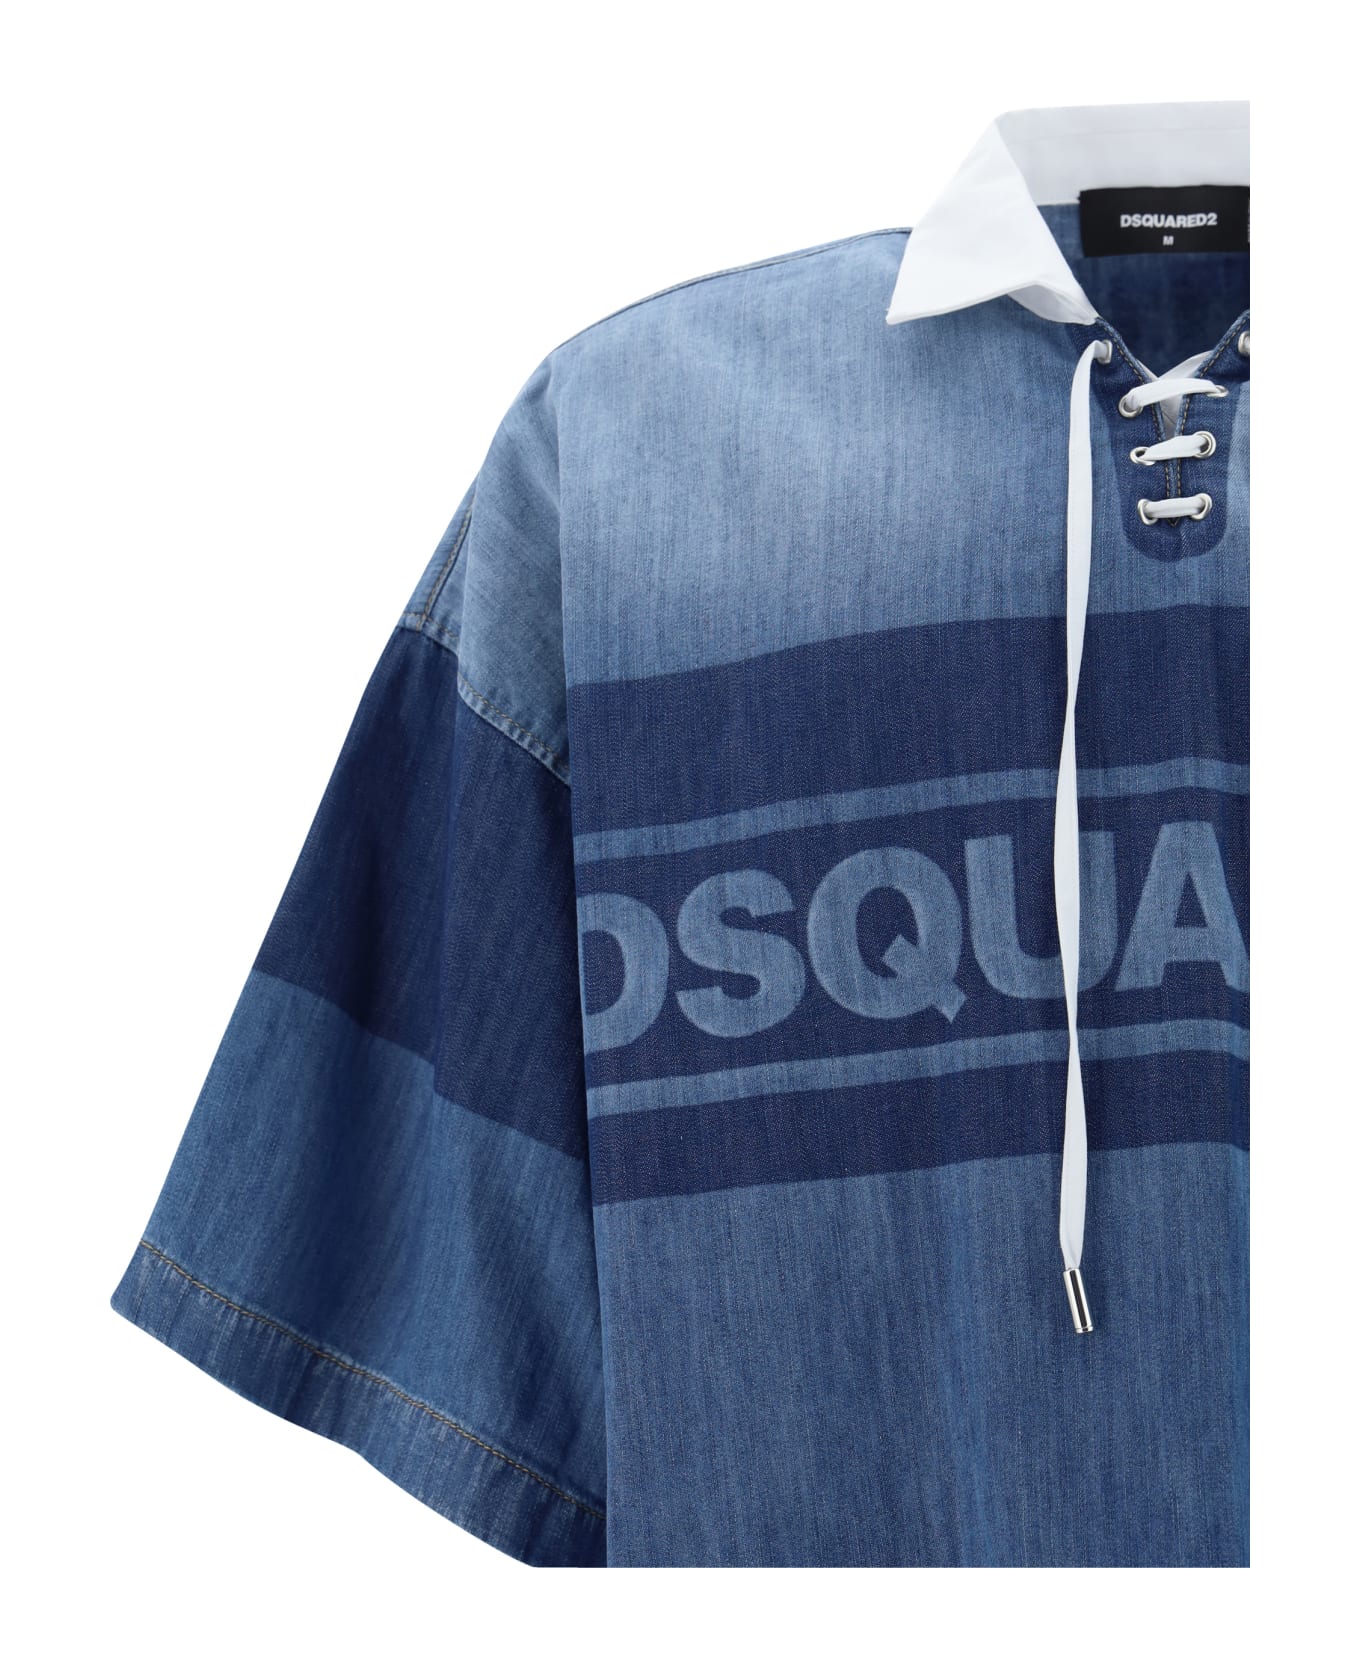 Dsquared2 Polo Shirt - Blue シャツ